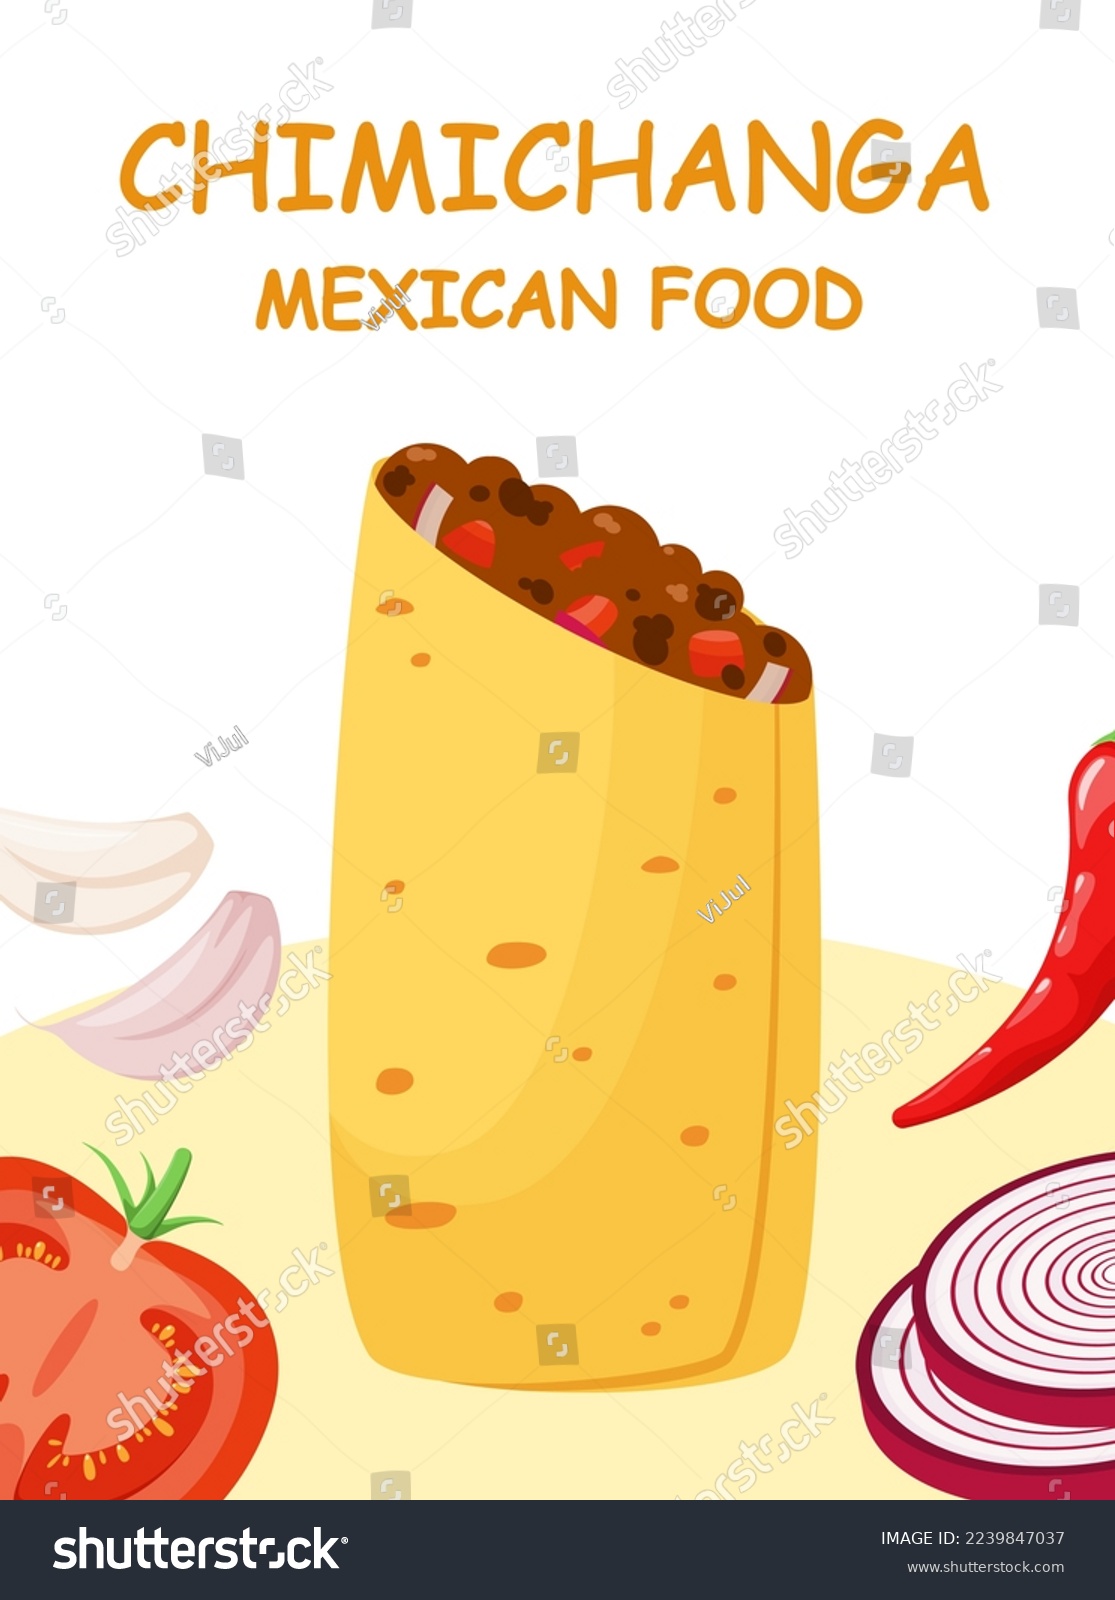 SVG of Chimichanga with meat. Mexican food.
 svg